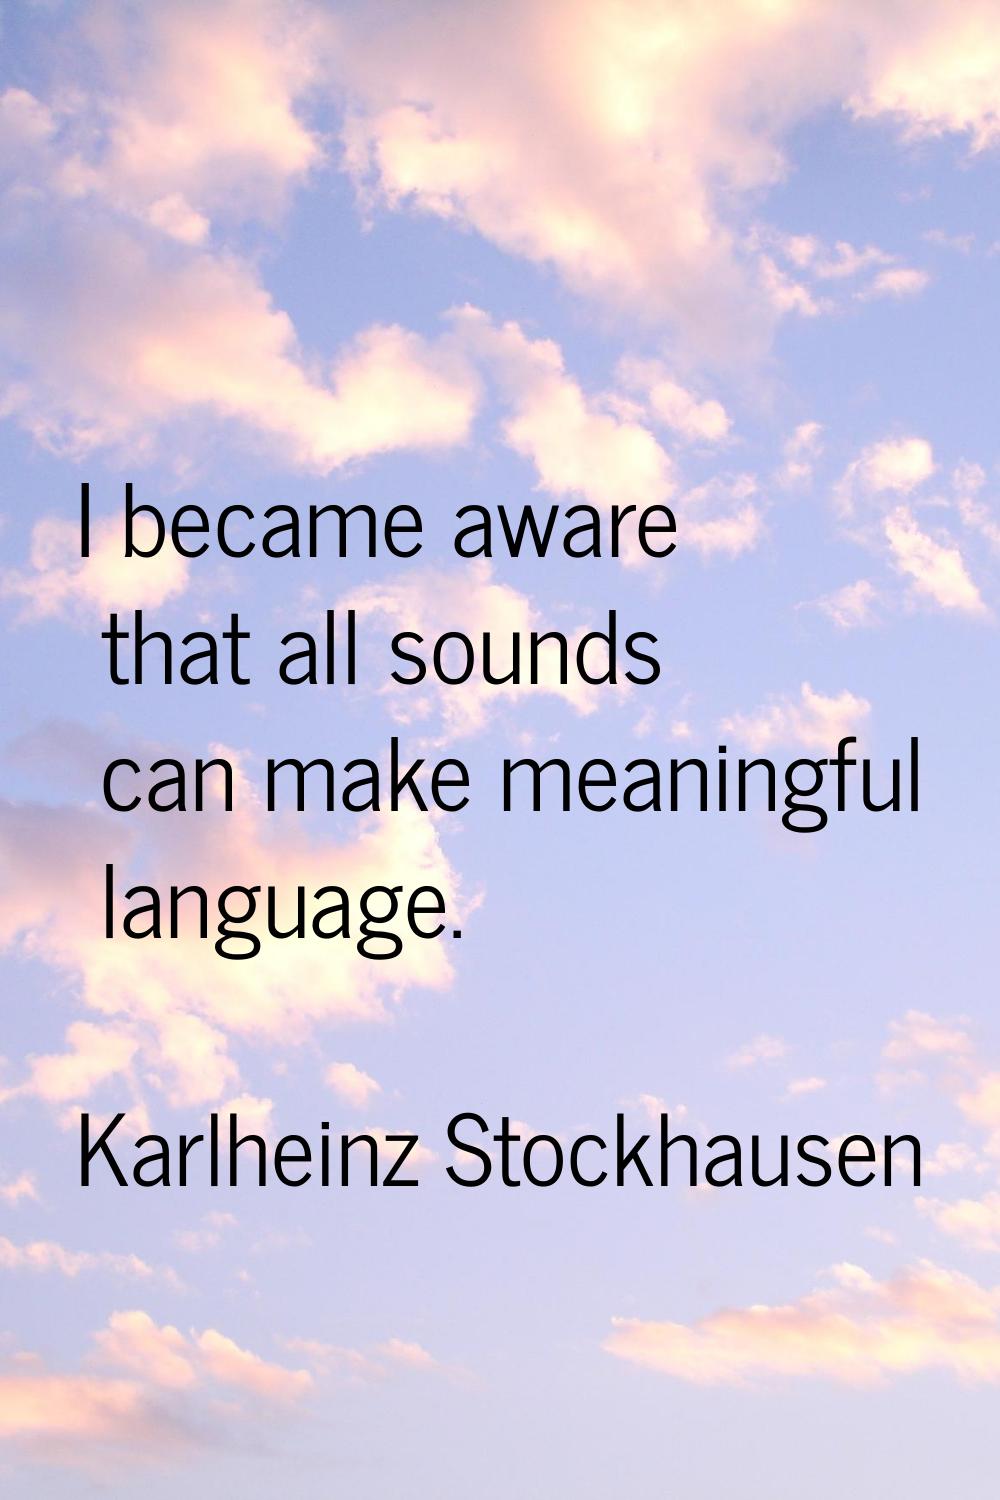 I became aware that all sounds can make meaningful language.